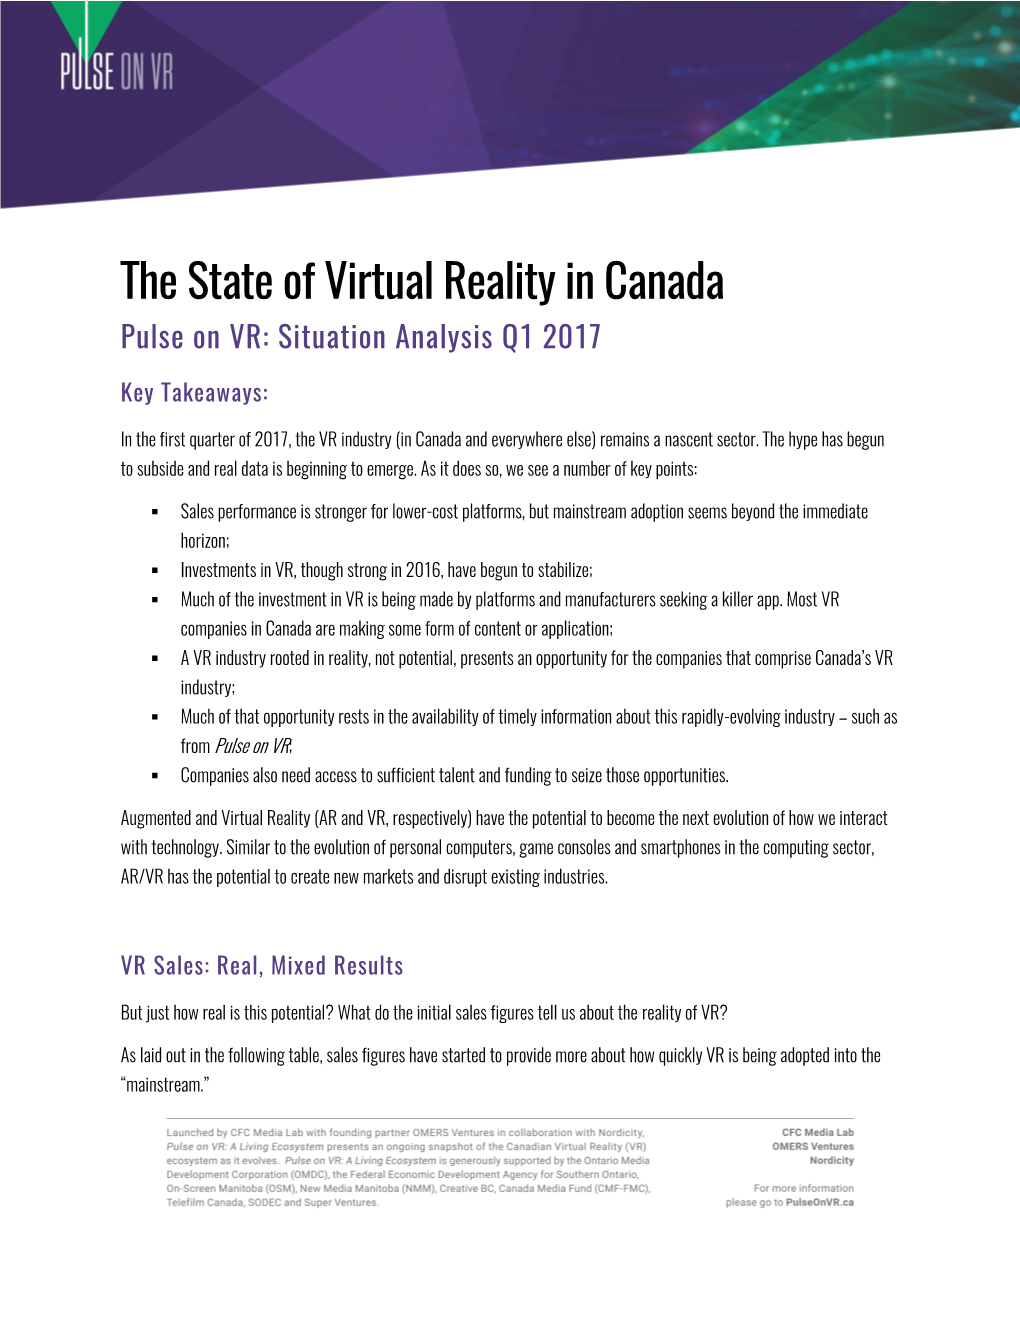 The State of Virtual Reality in Canada Pulse on VR: Situation Analysis Q1 2017